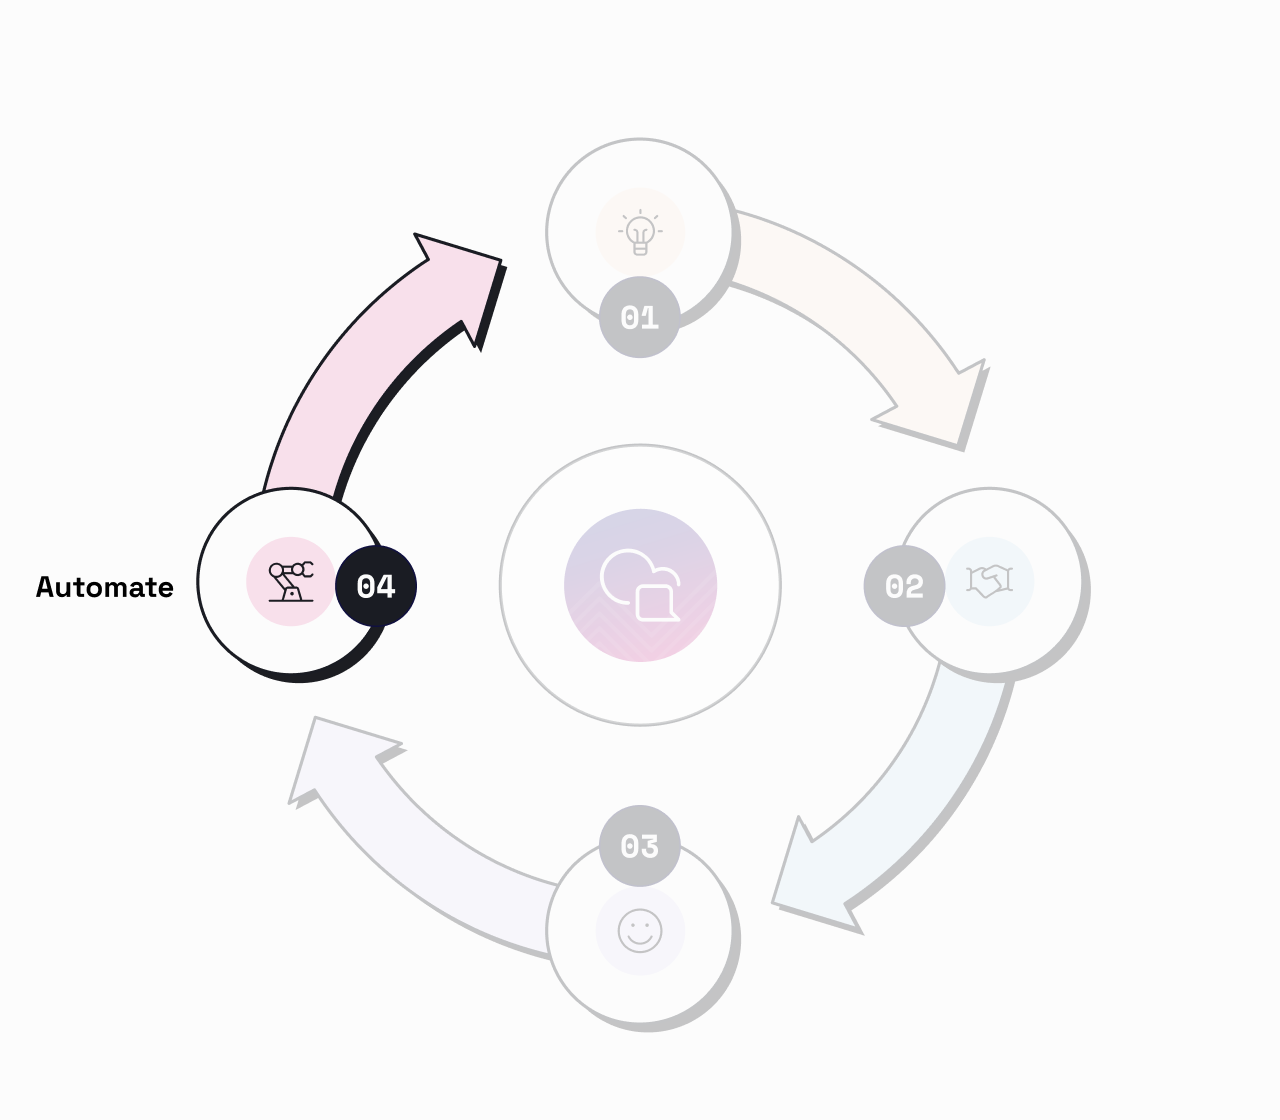 Automate stage of Conversational Flywheel, where AI can help CCaaS solutions scale customer support processes